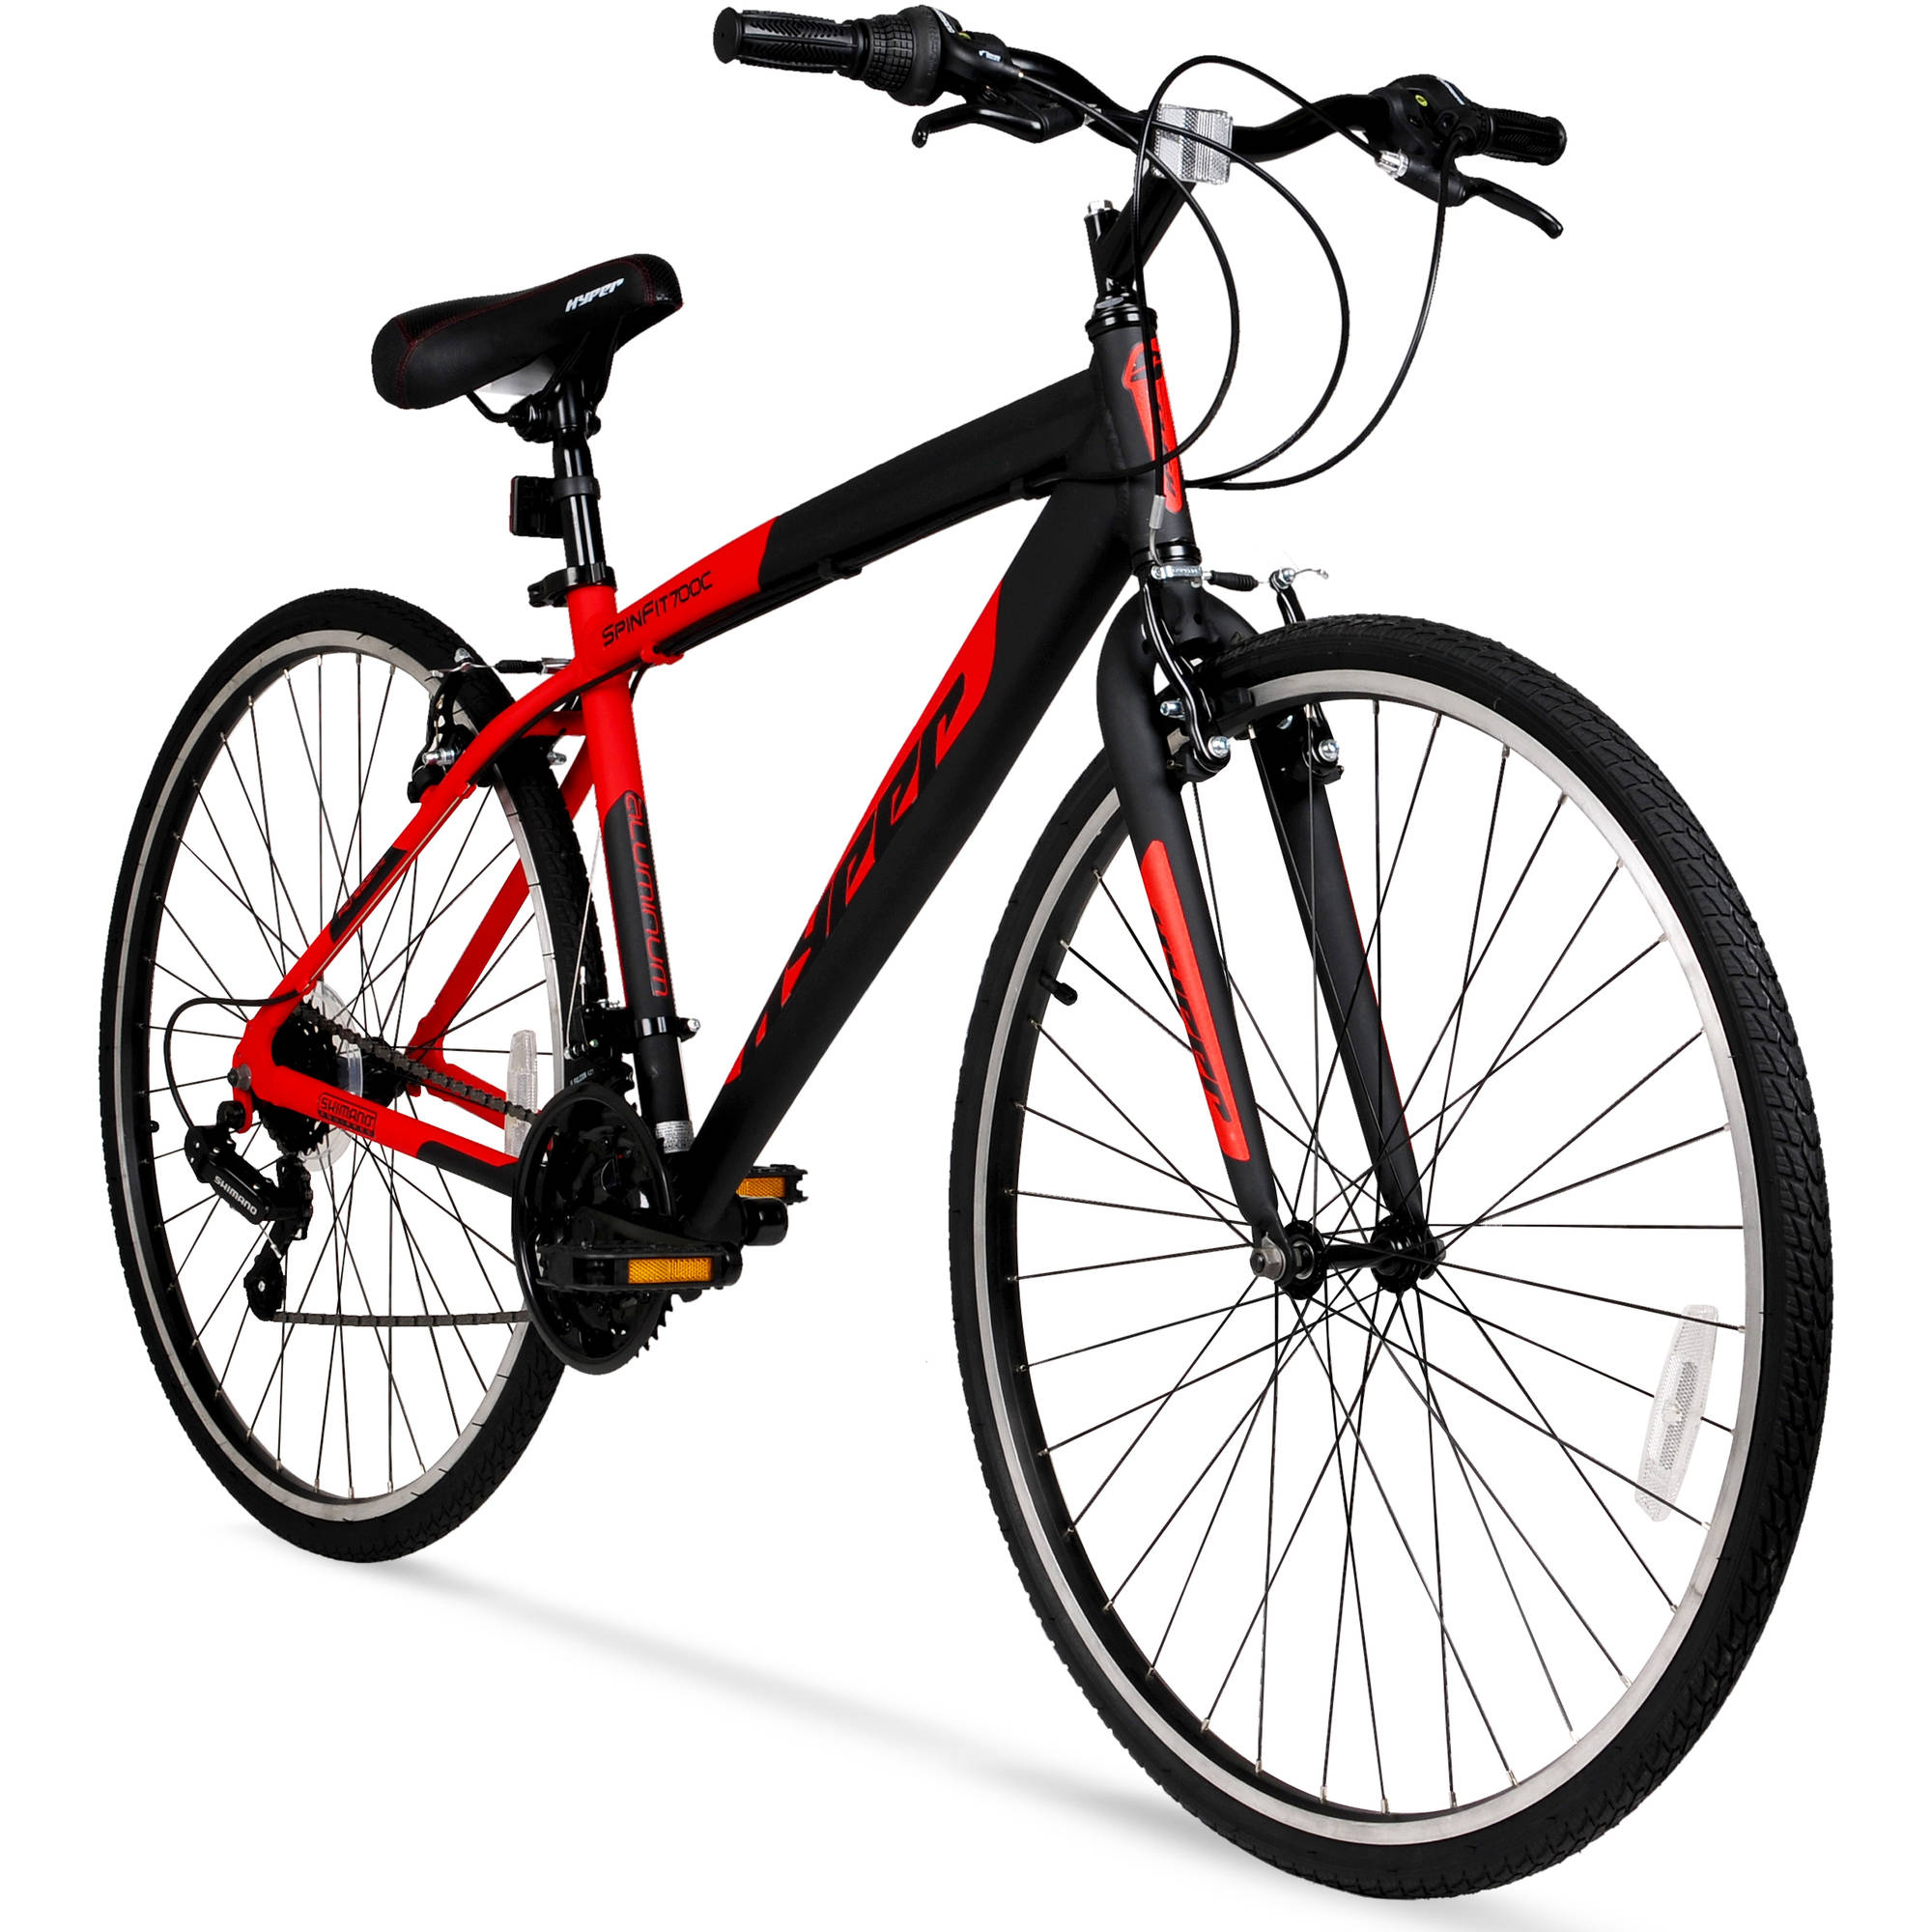 Hyper Bicycle 700c Men's Spin Fit Hybrid Bike, Black and Red - image 1 of 7